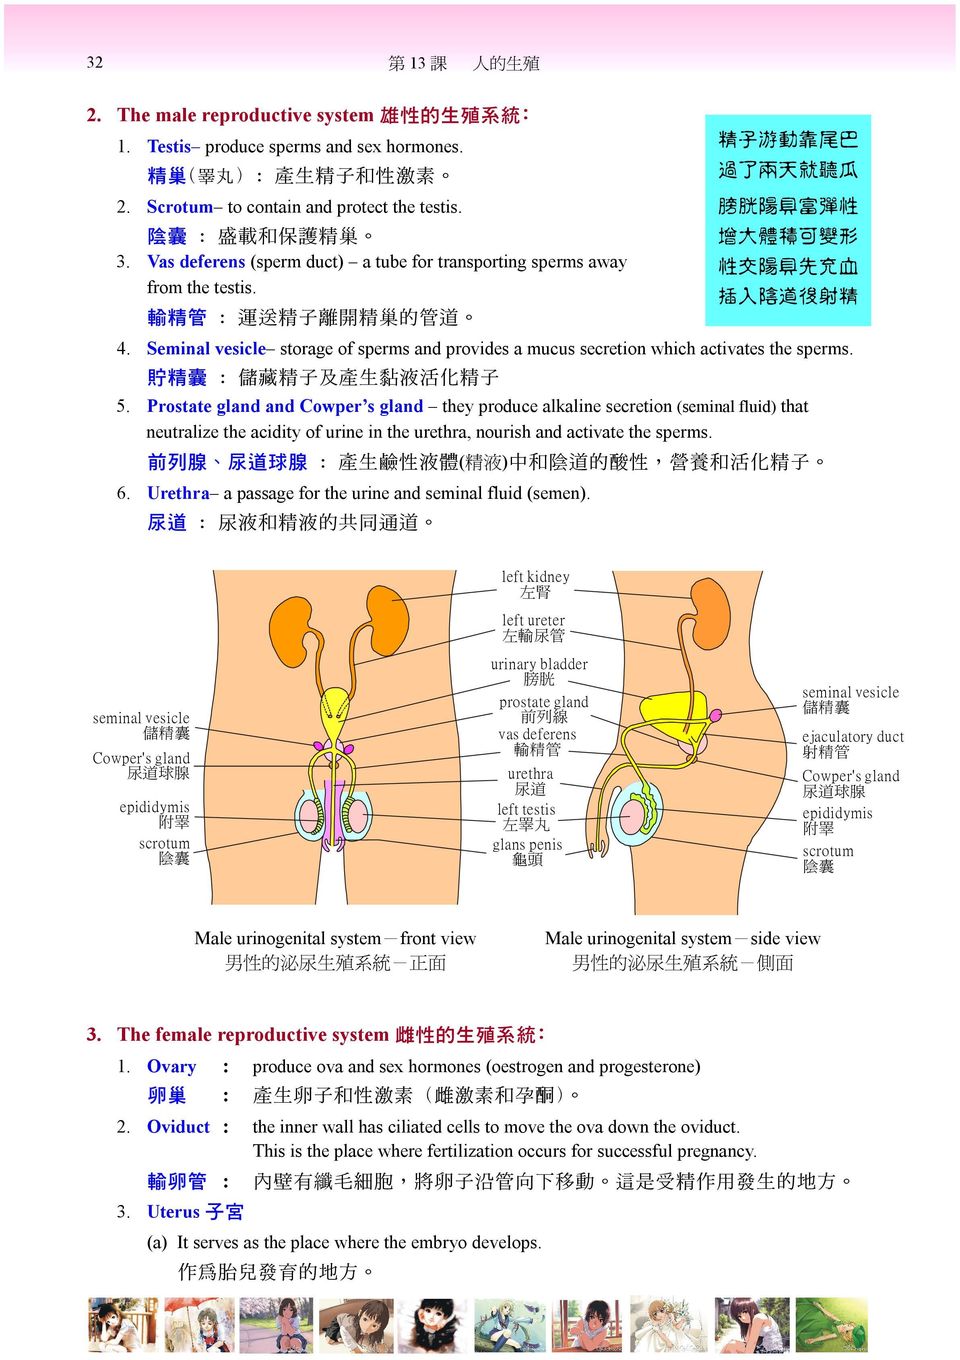 Seminal vesicle storage of sperms and provides a mucus secretion which activates the sperms. 貯 精 囊 : 儲 藏 精 子 及 產 生 黏 液 活 化 精 子 5.